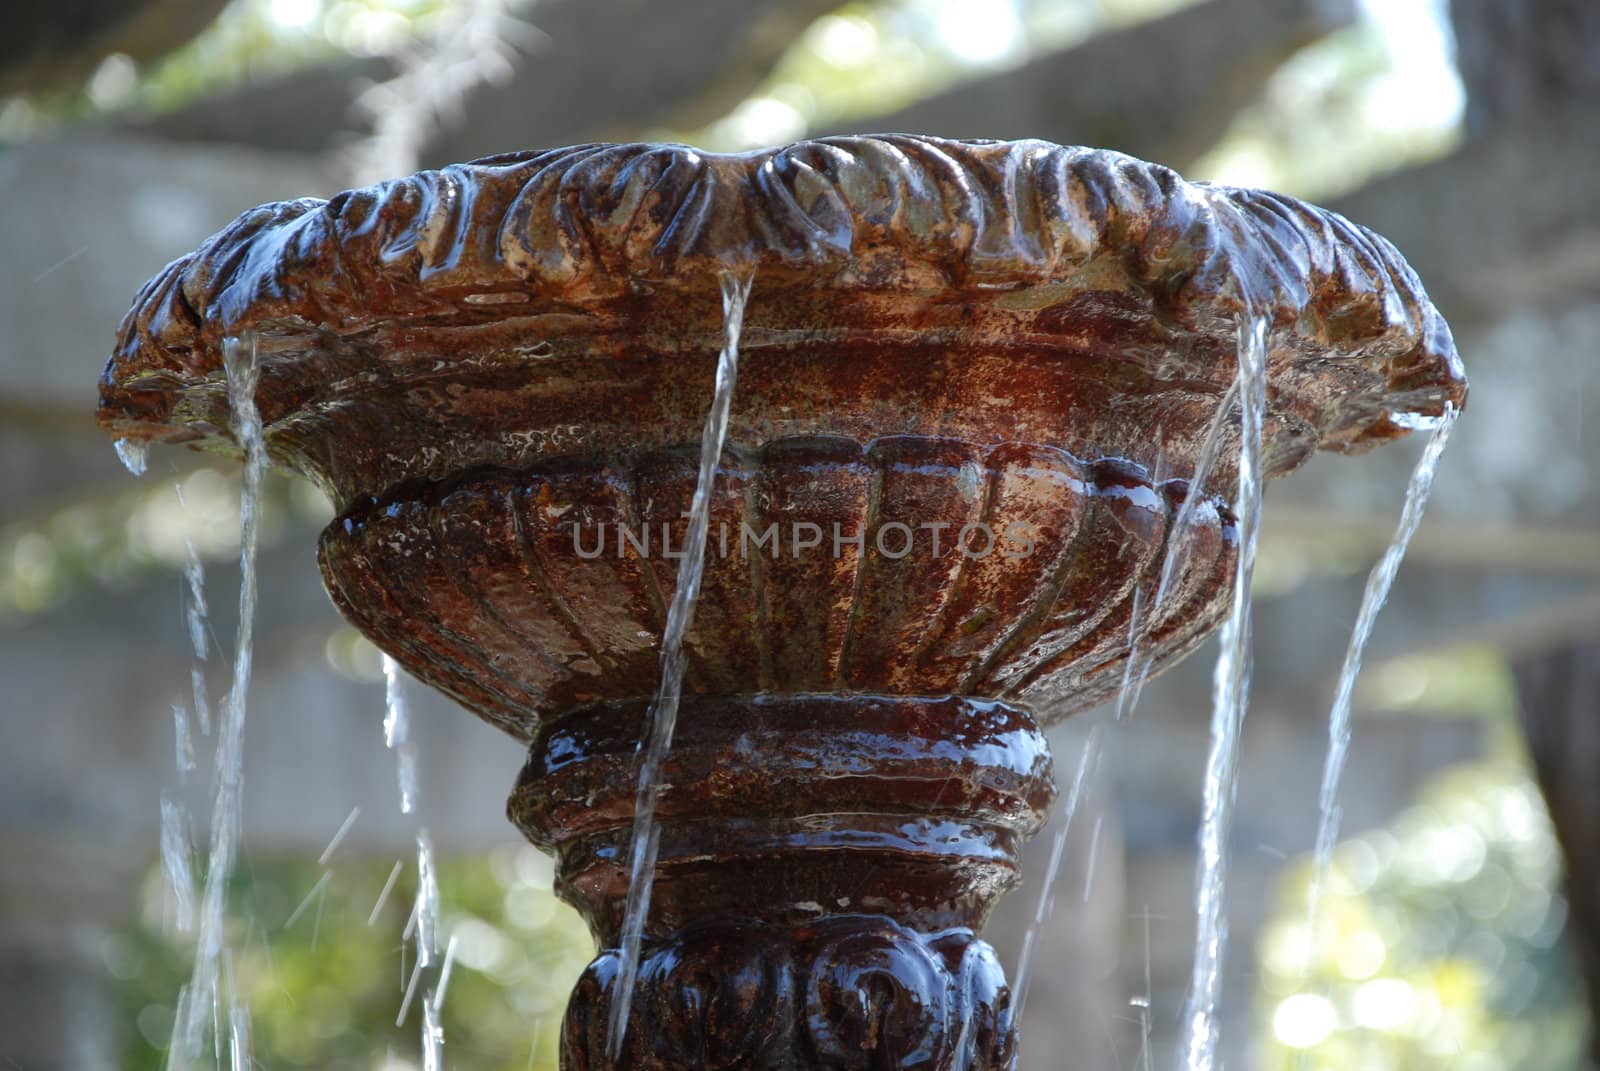 Water flowing over a statue fountain in a city park